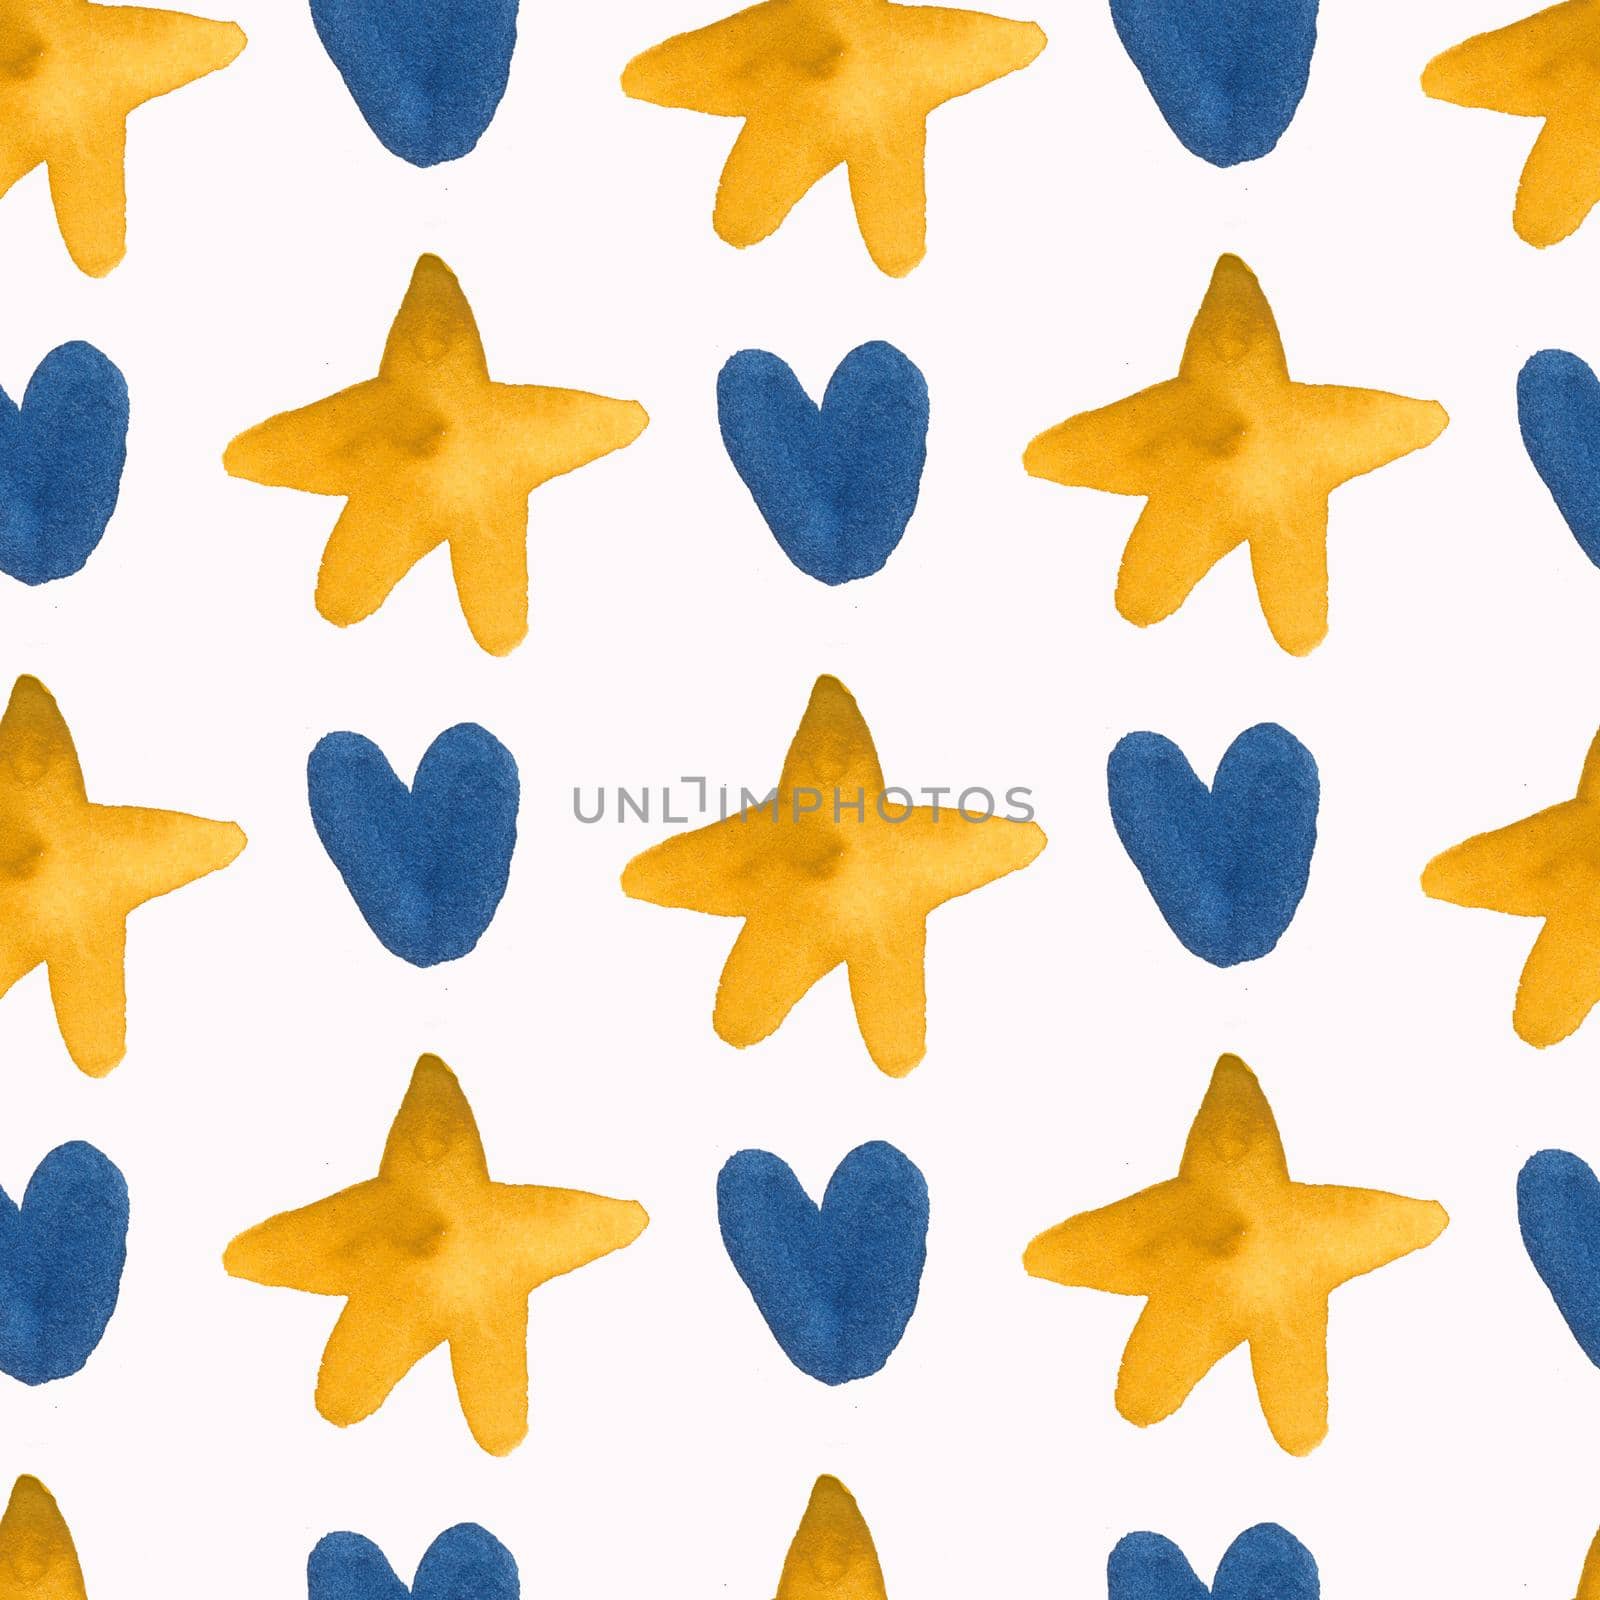 Seamless watercolor pattern of yellow stars and blue hearts. by electrovenik